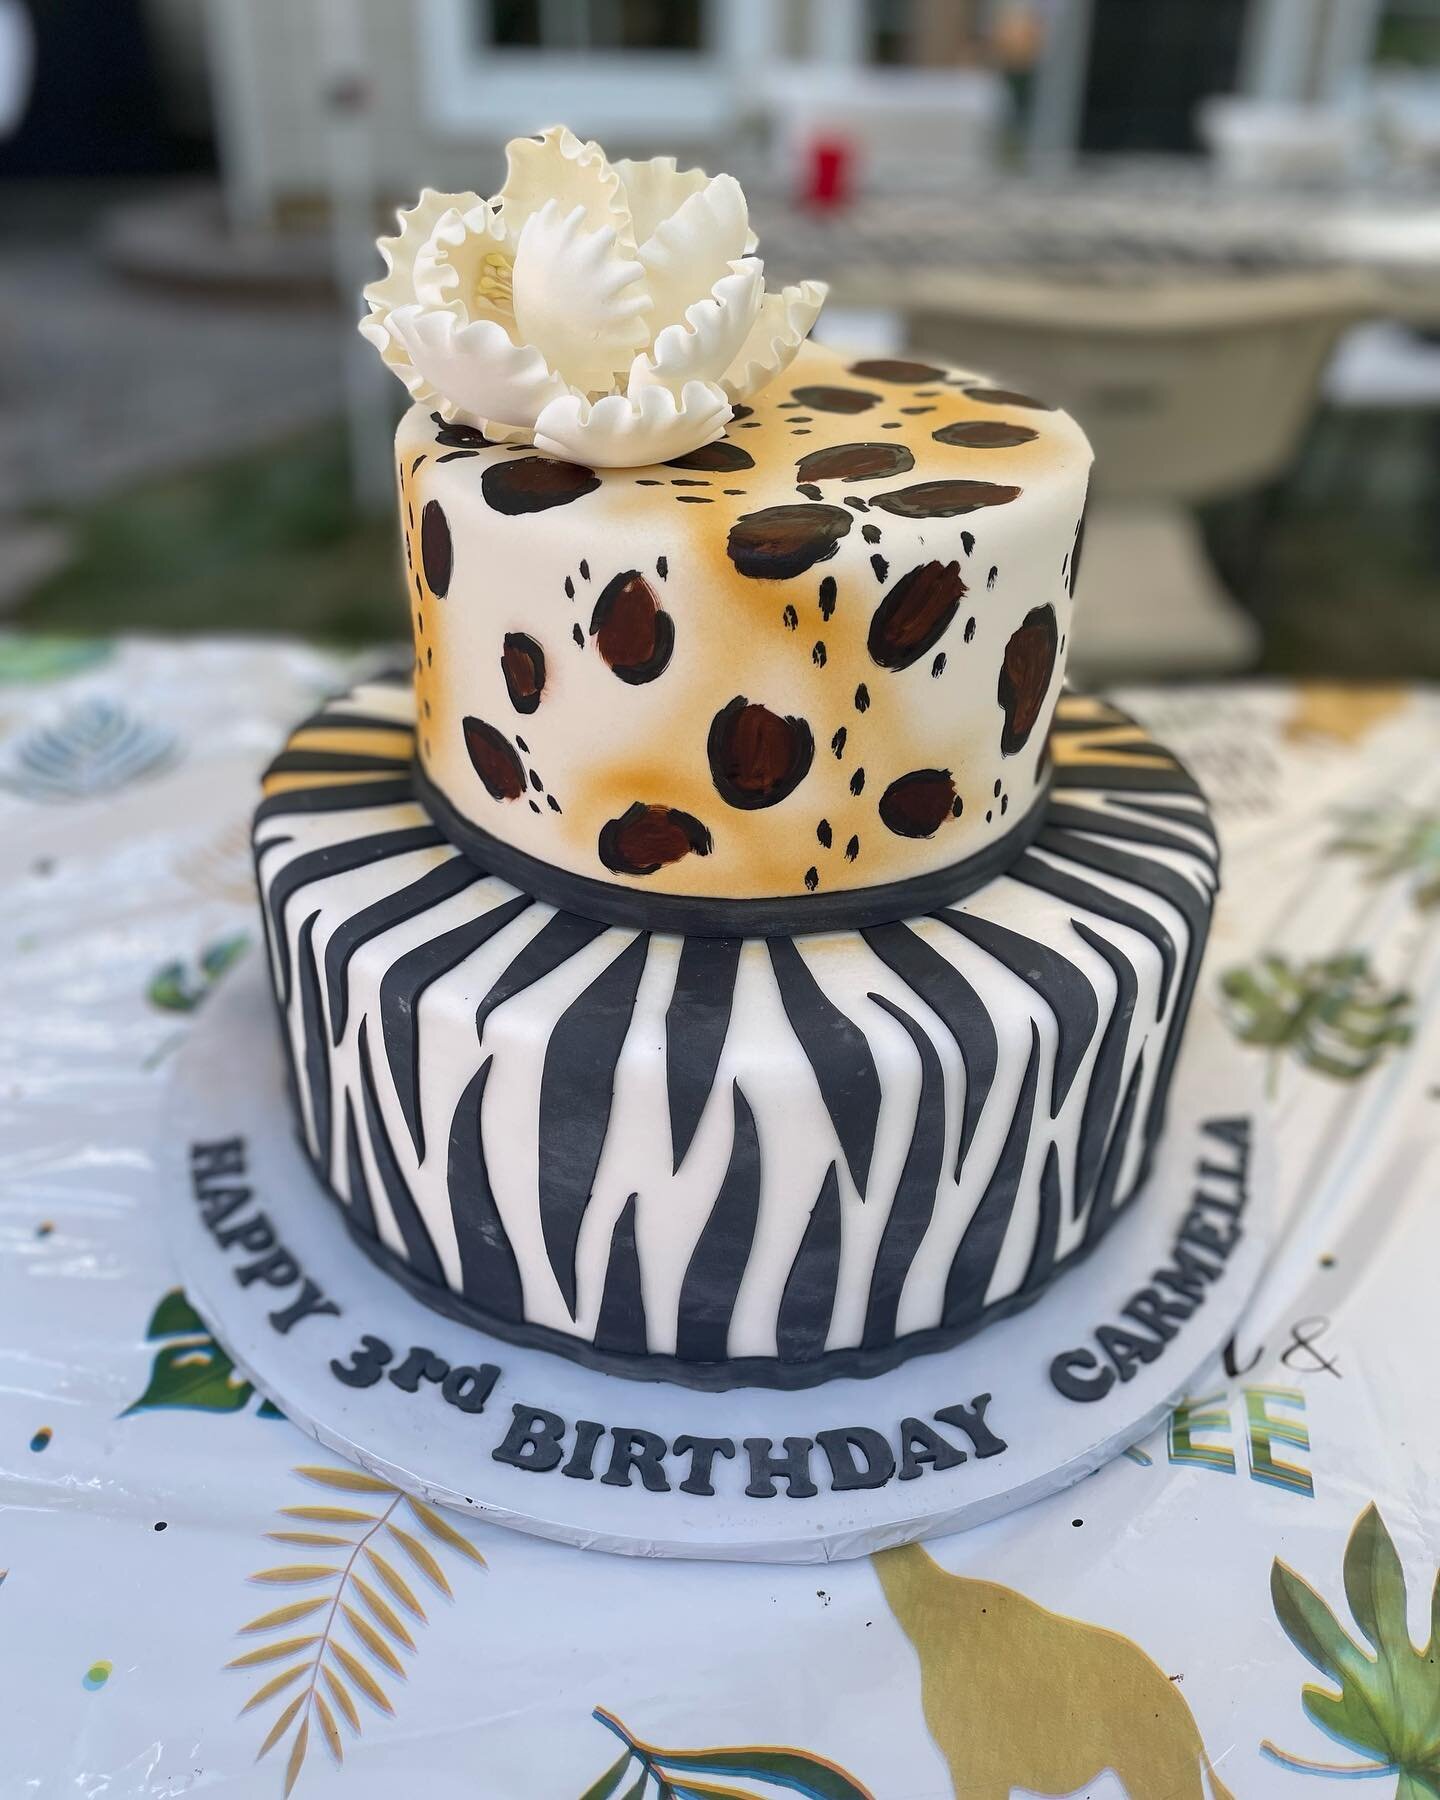 Holding on to the last days of summer with some summer birthday cakes. #rudyspastryshop #cakes #leopardprint #bakeries #njbakeries #bloomfield #goodbyesummer